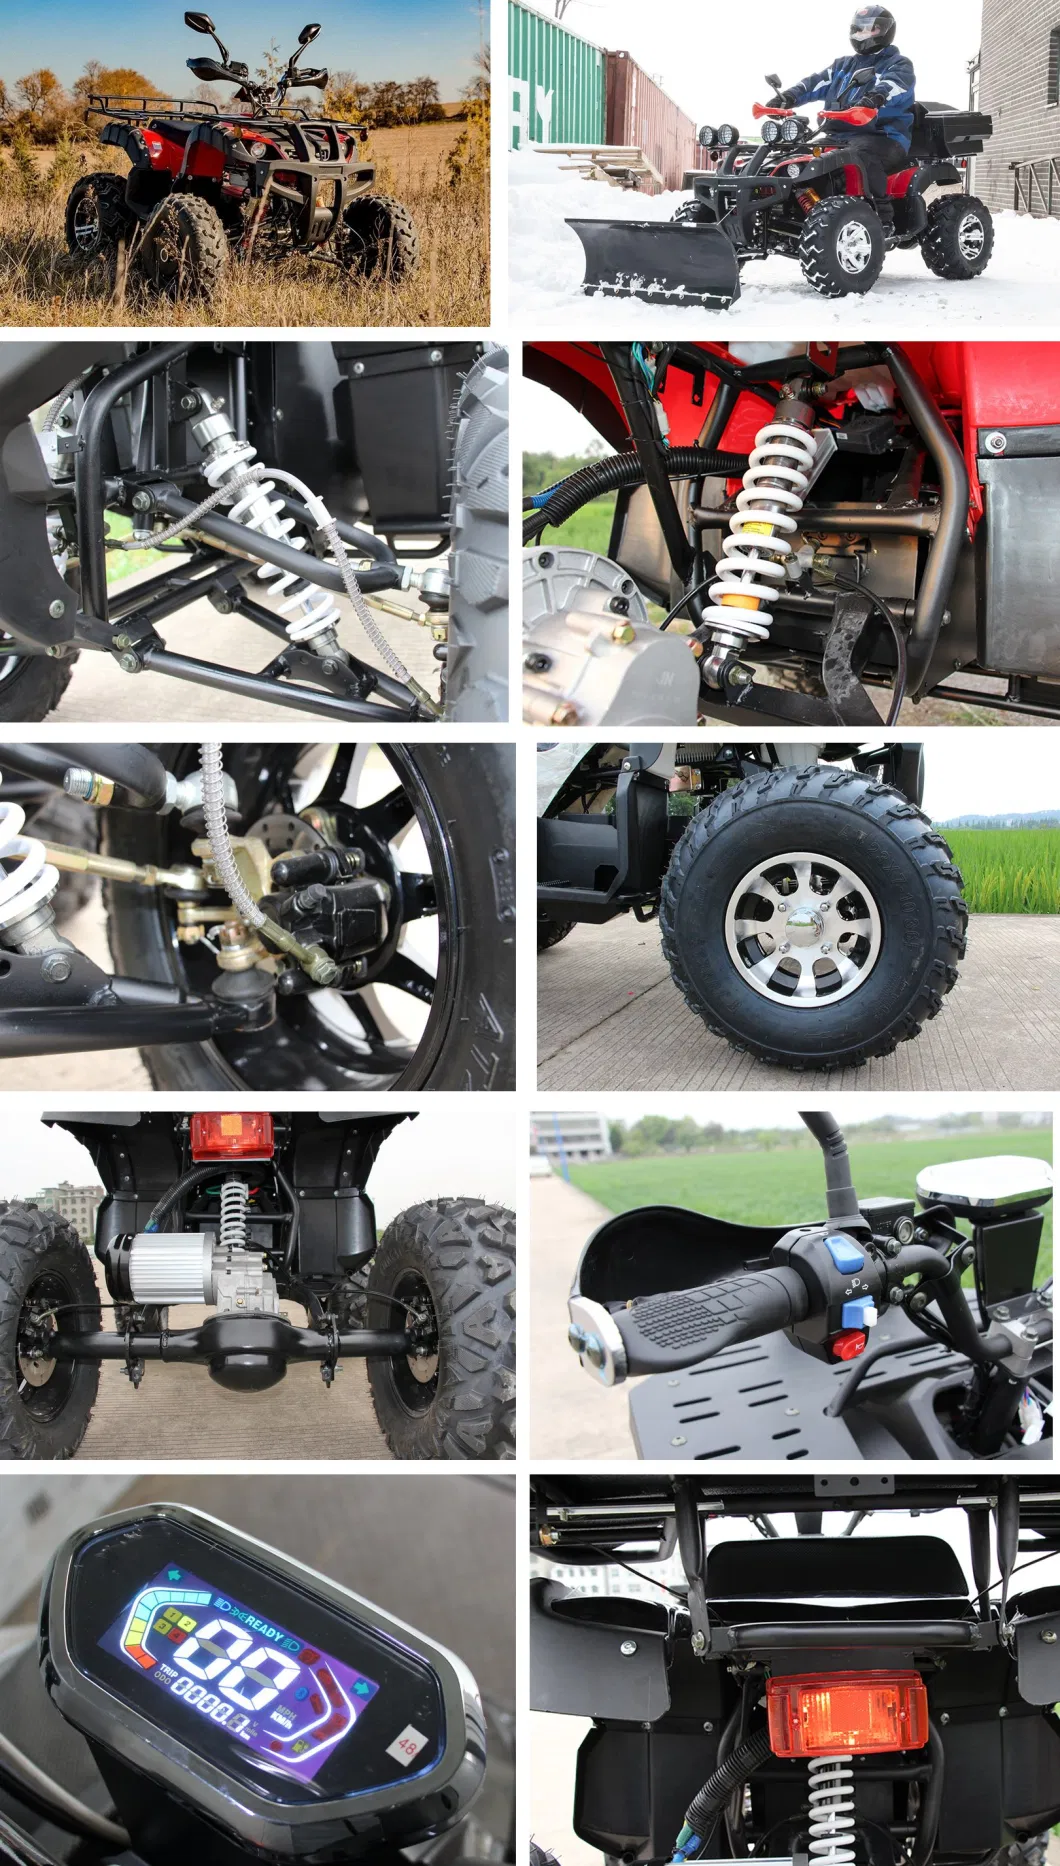 4000W 72V High Quality Chinese ATV Quad Electric Quads with Lithium Battery